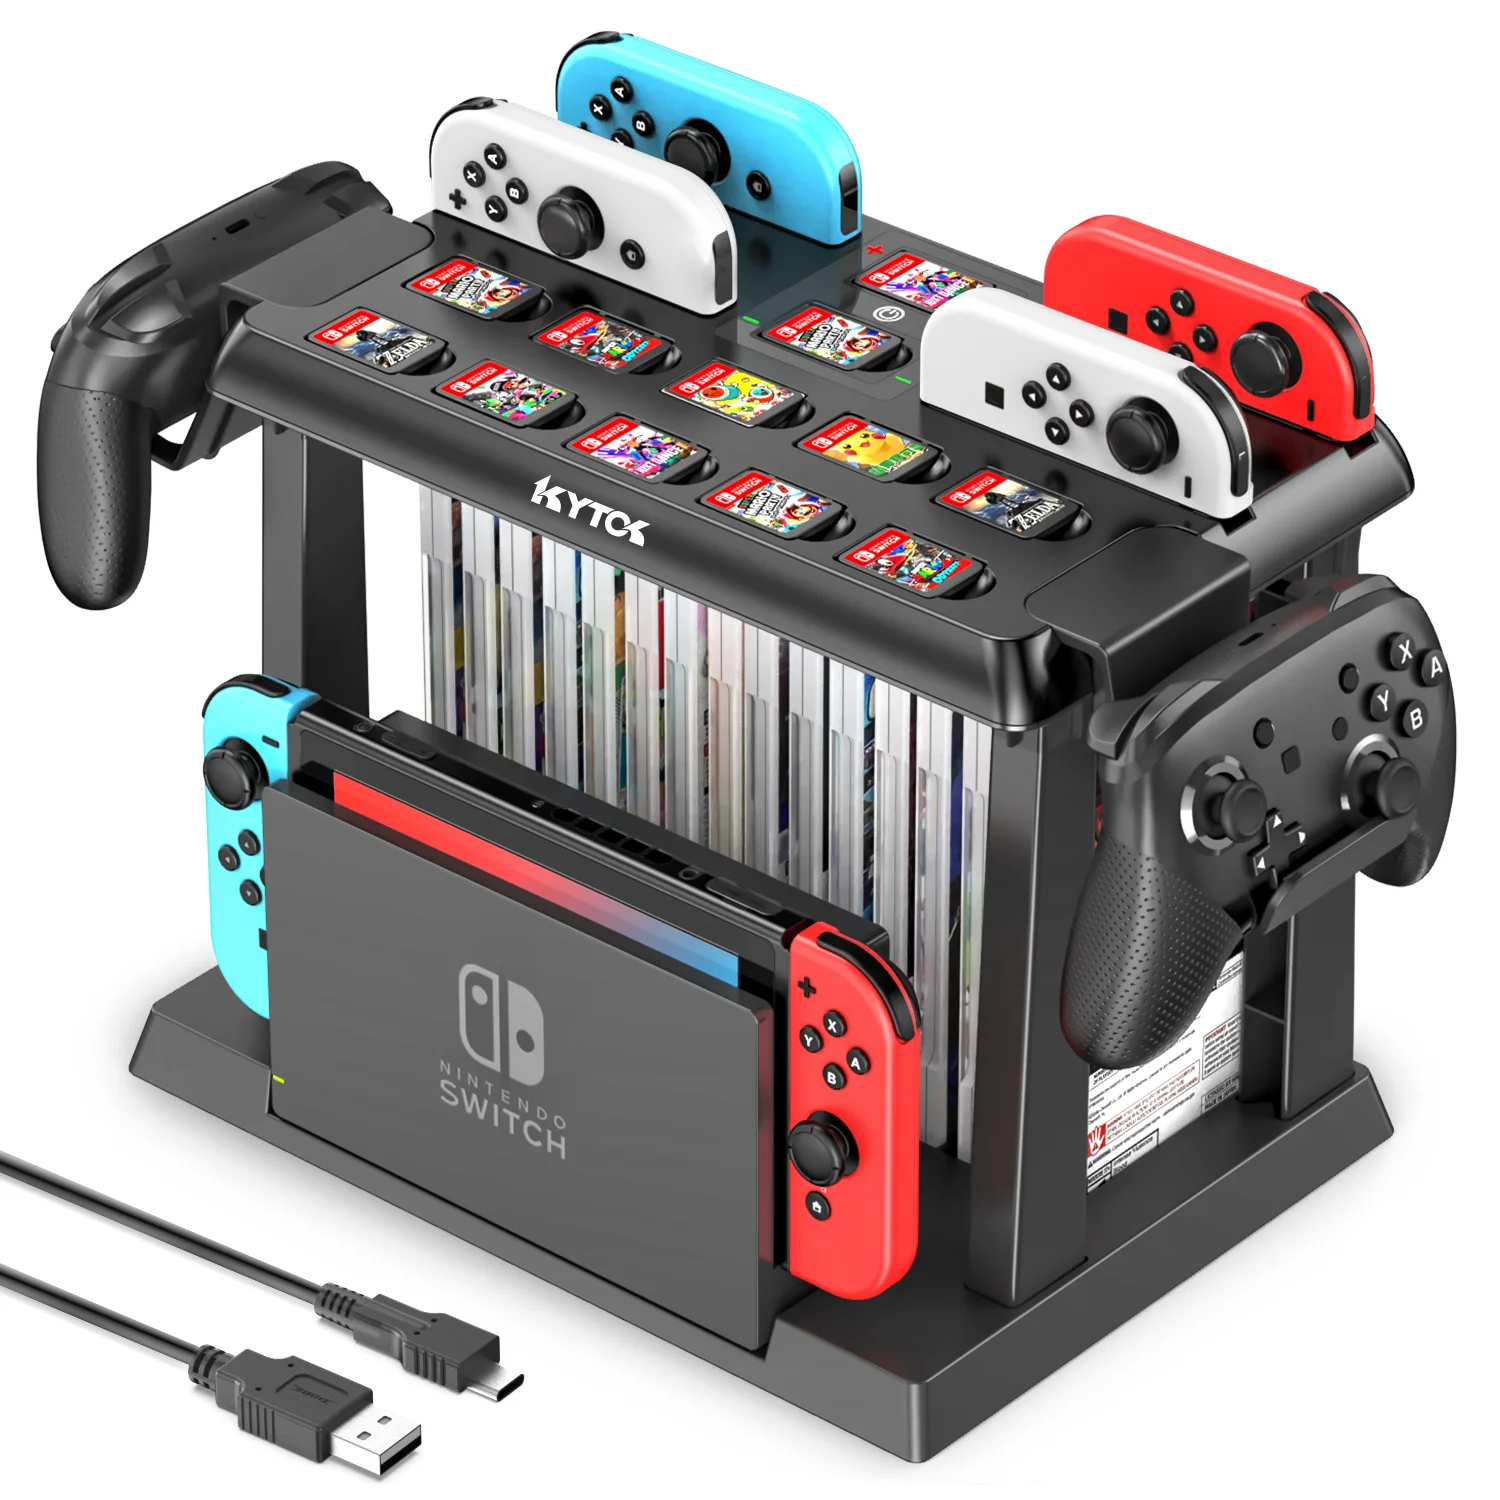 OIVO For Switch Joycon Charger 2 Pro Controller Holder 28 Game Storage For Nintendo Switch OLED Charging Dock Station with Cable